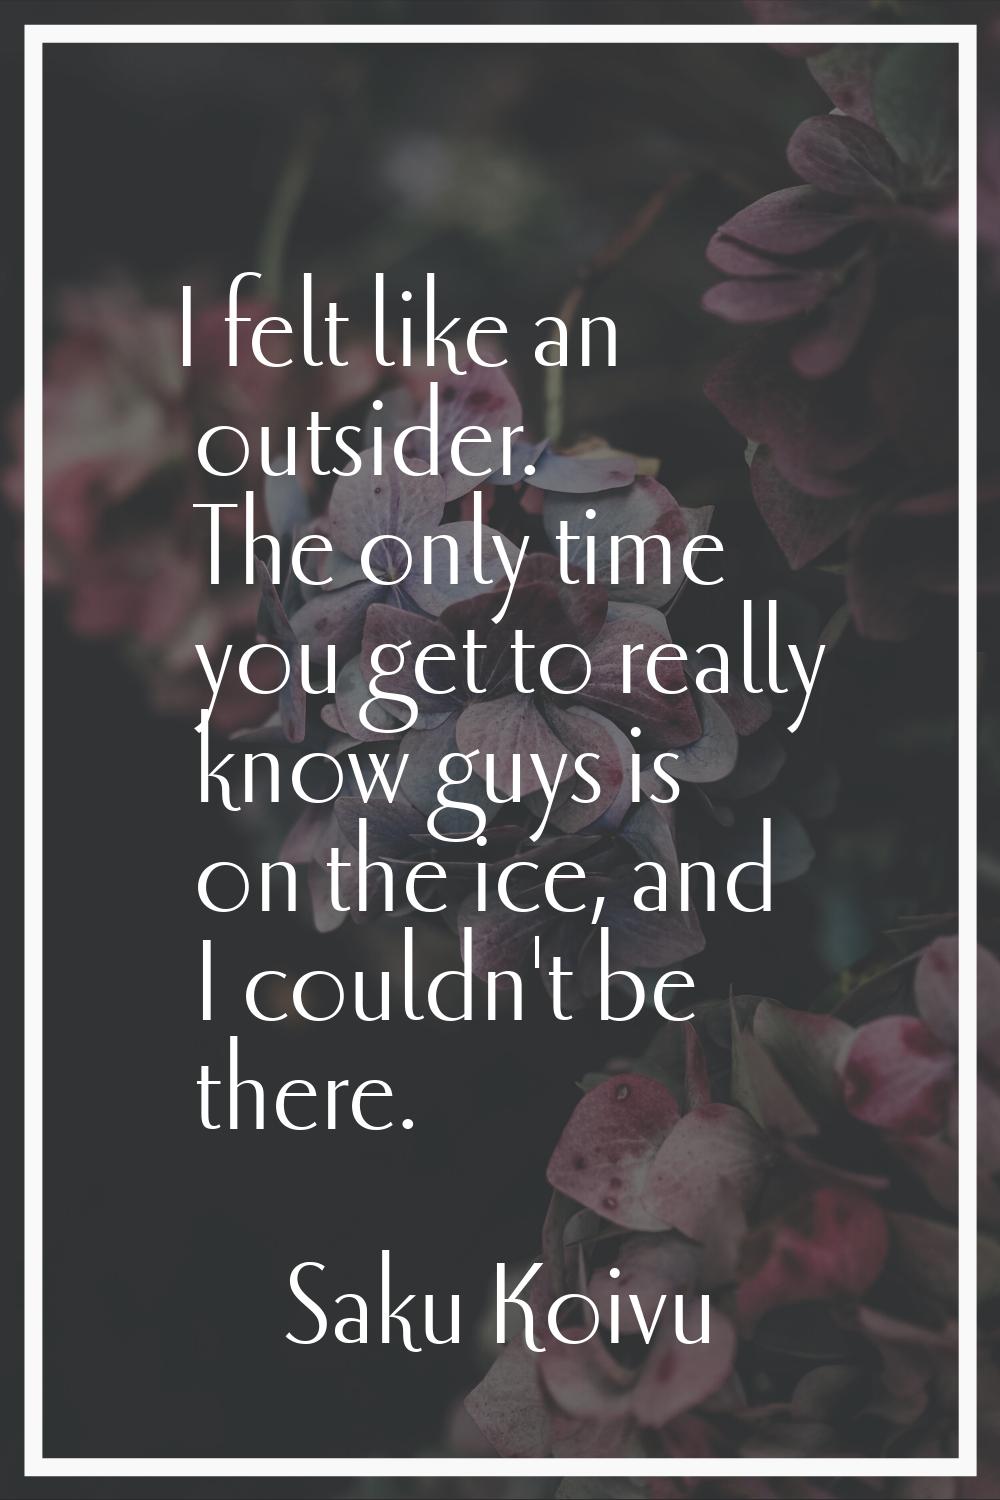 I felt like an outsider. The only time you get to really know guys is on the ice, and I couldn't be